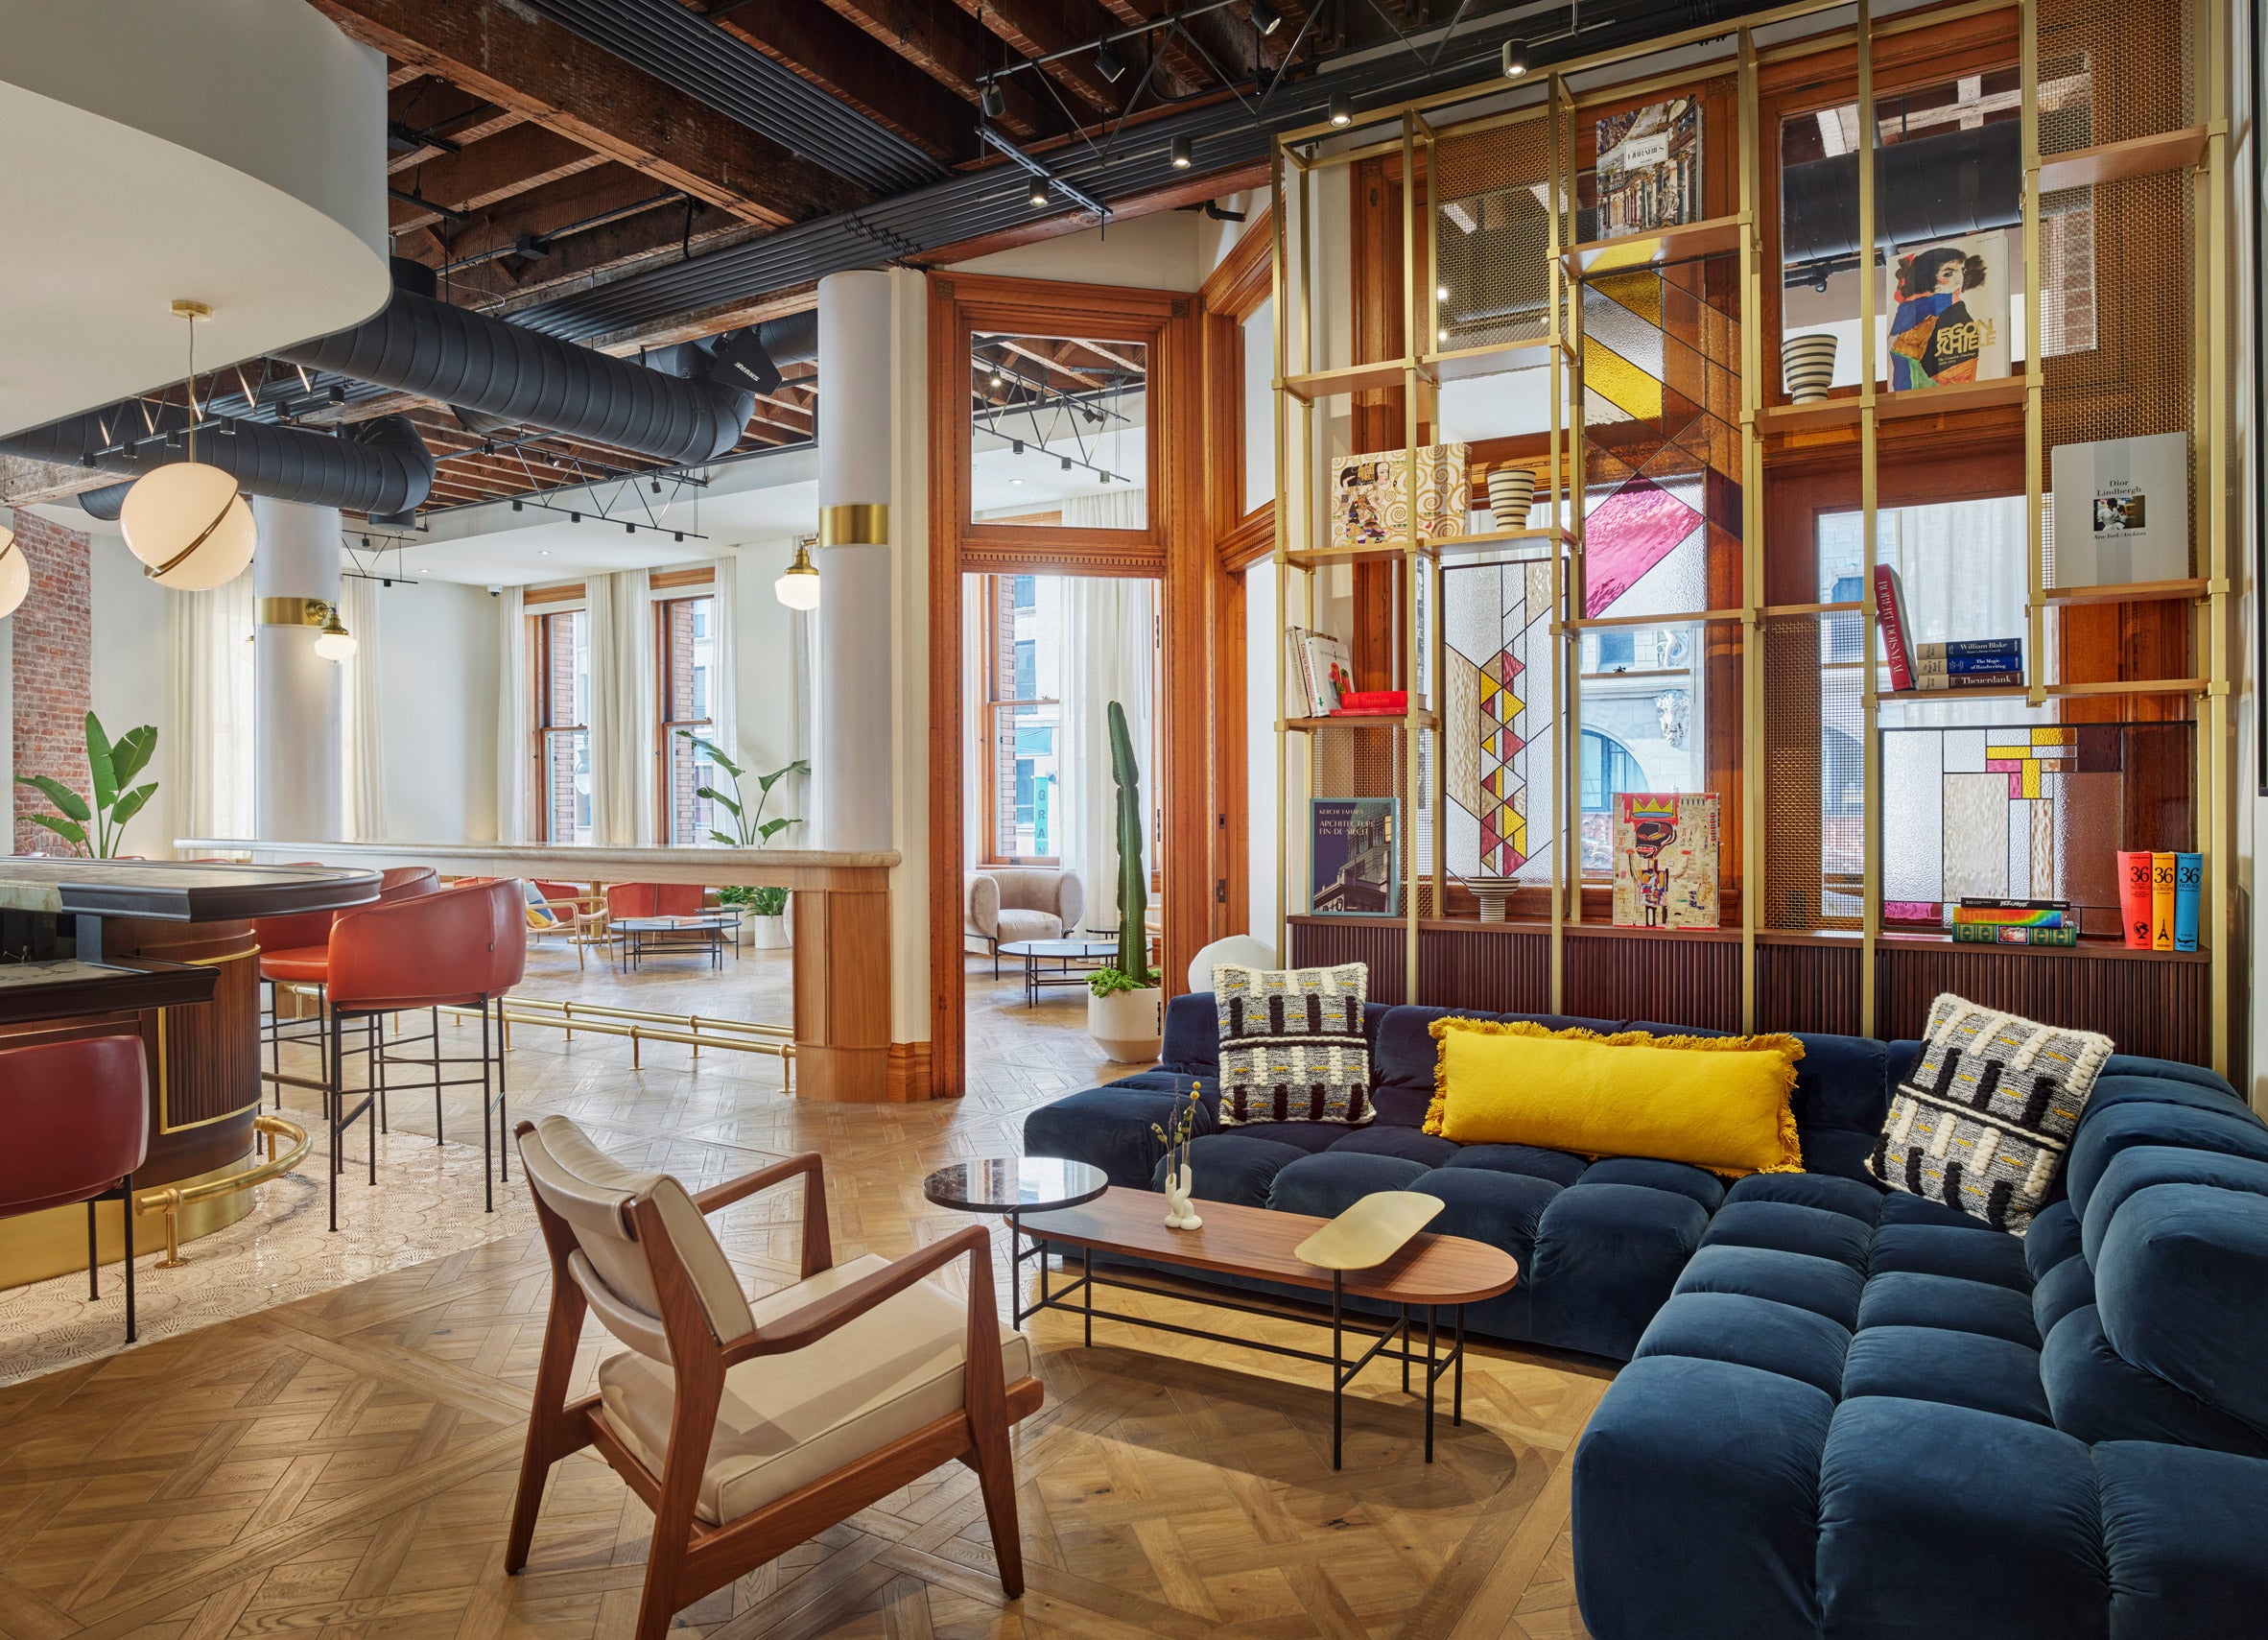 NeueHouse coworking space in Los Angeles